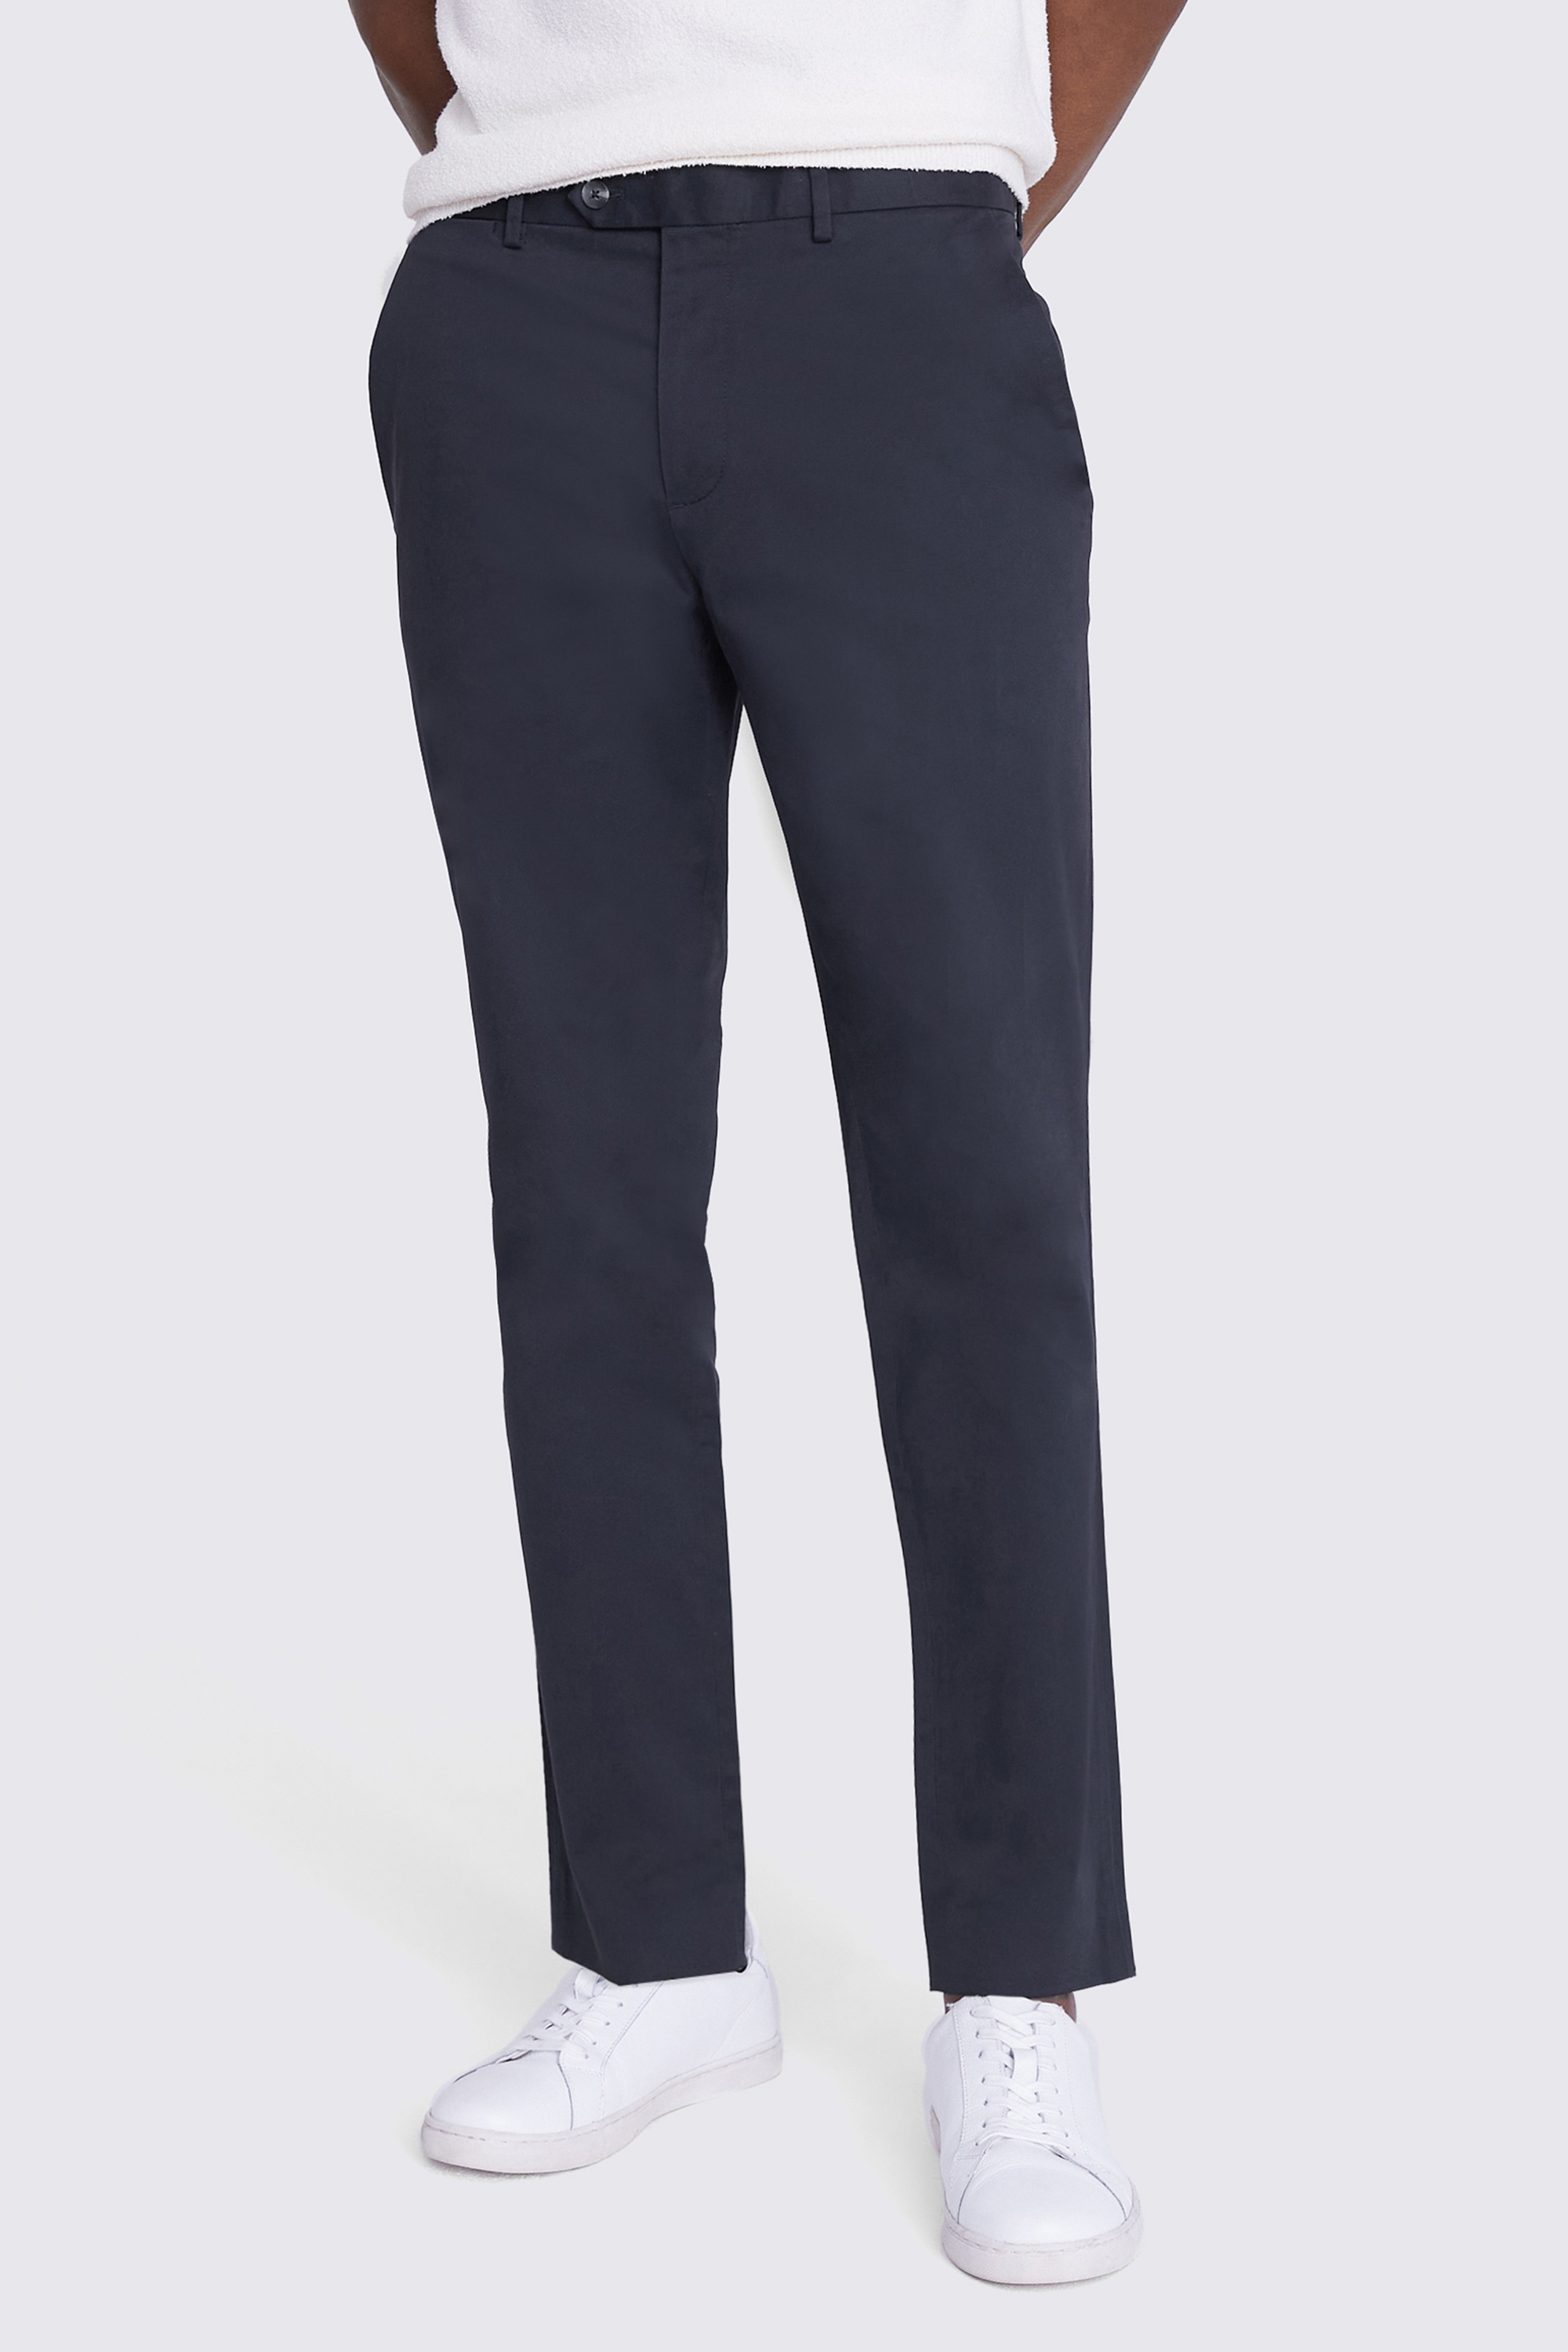 Slim Fit Navy Stretch Chinos | Buy Online at Moss